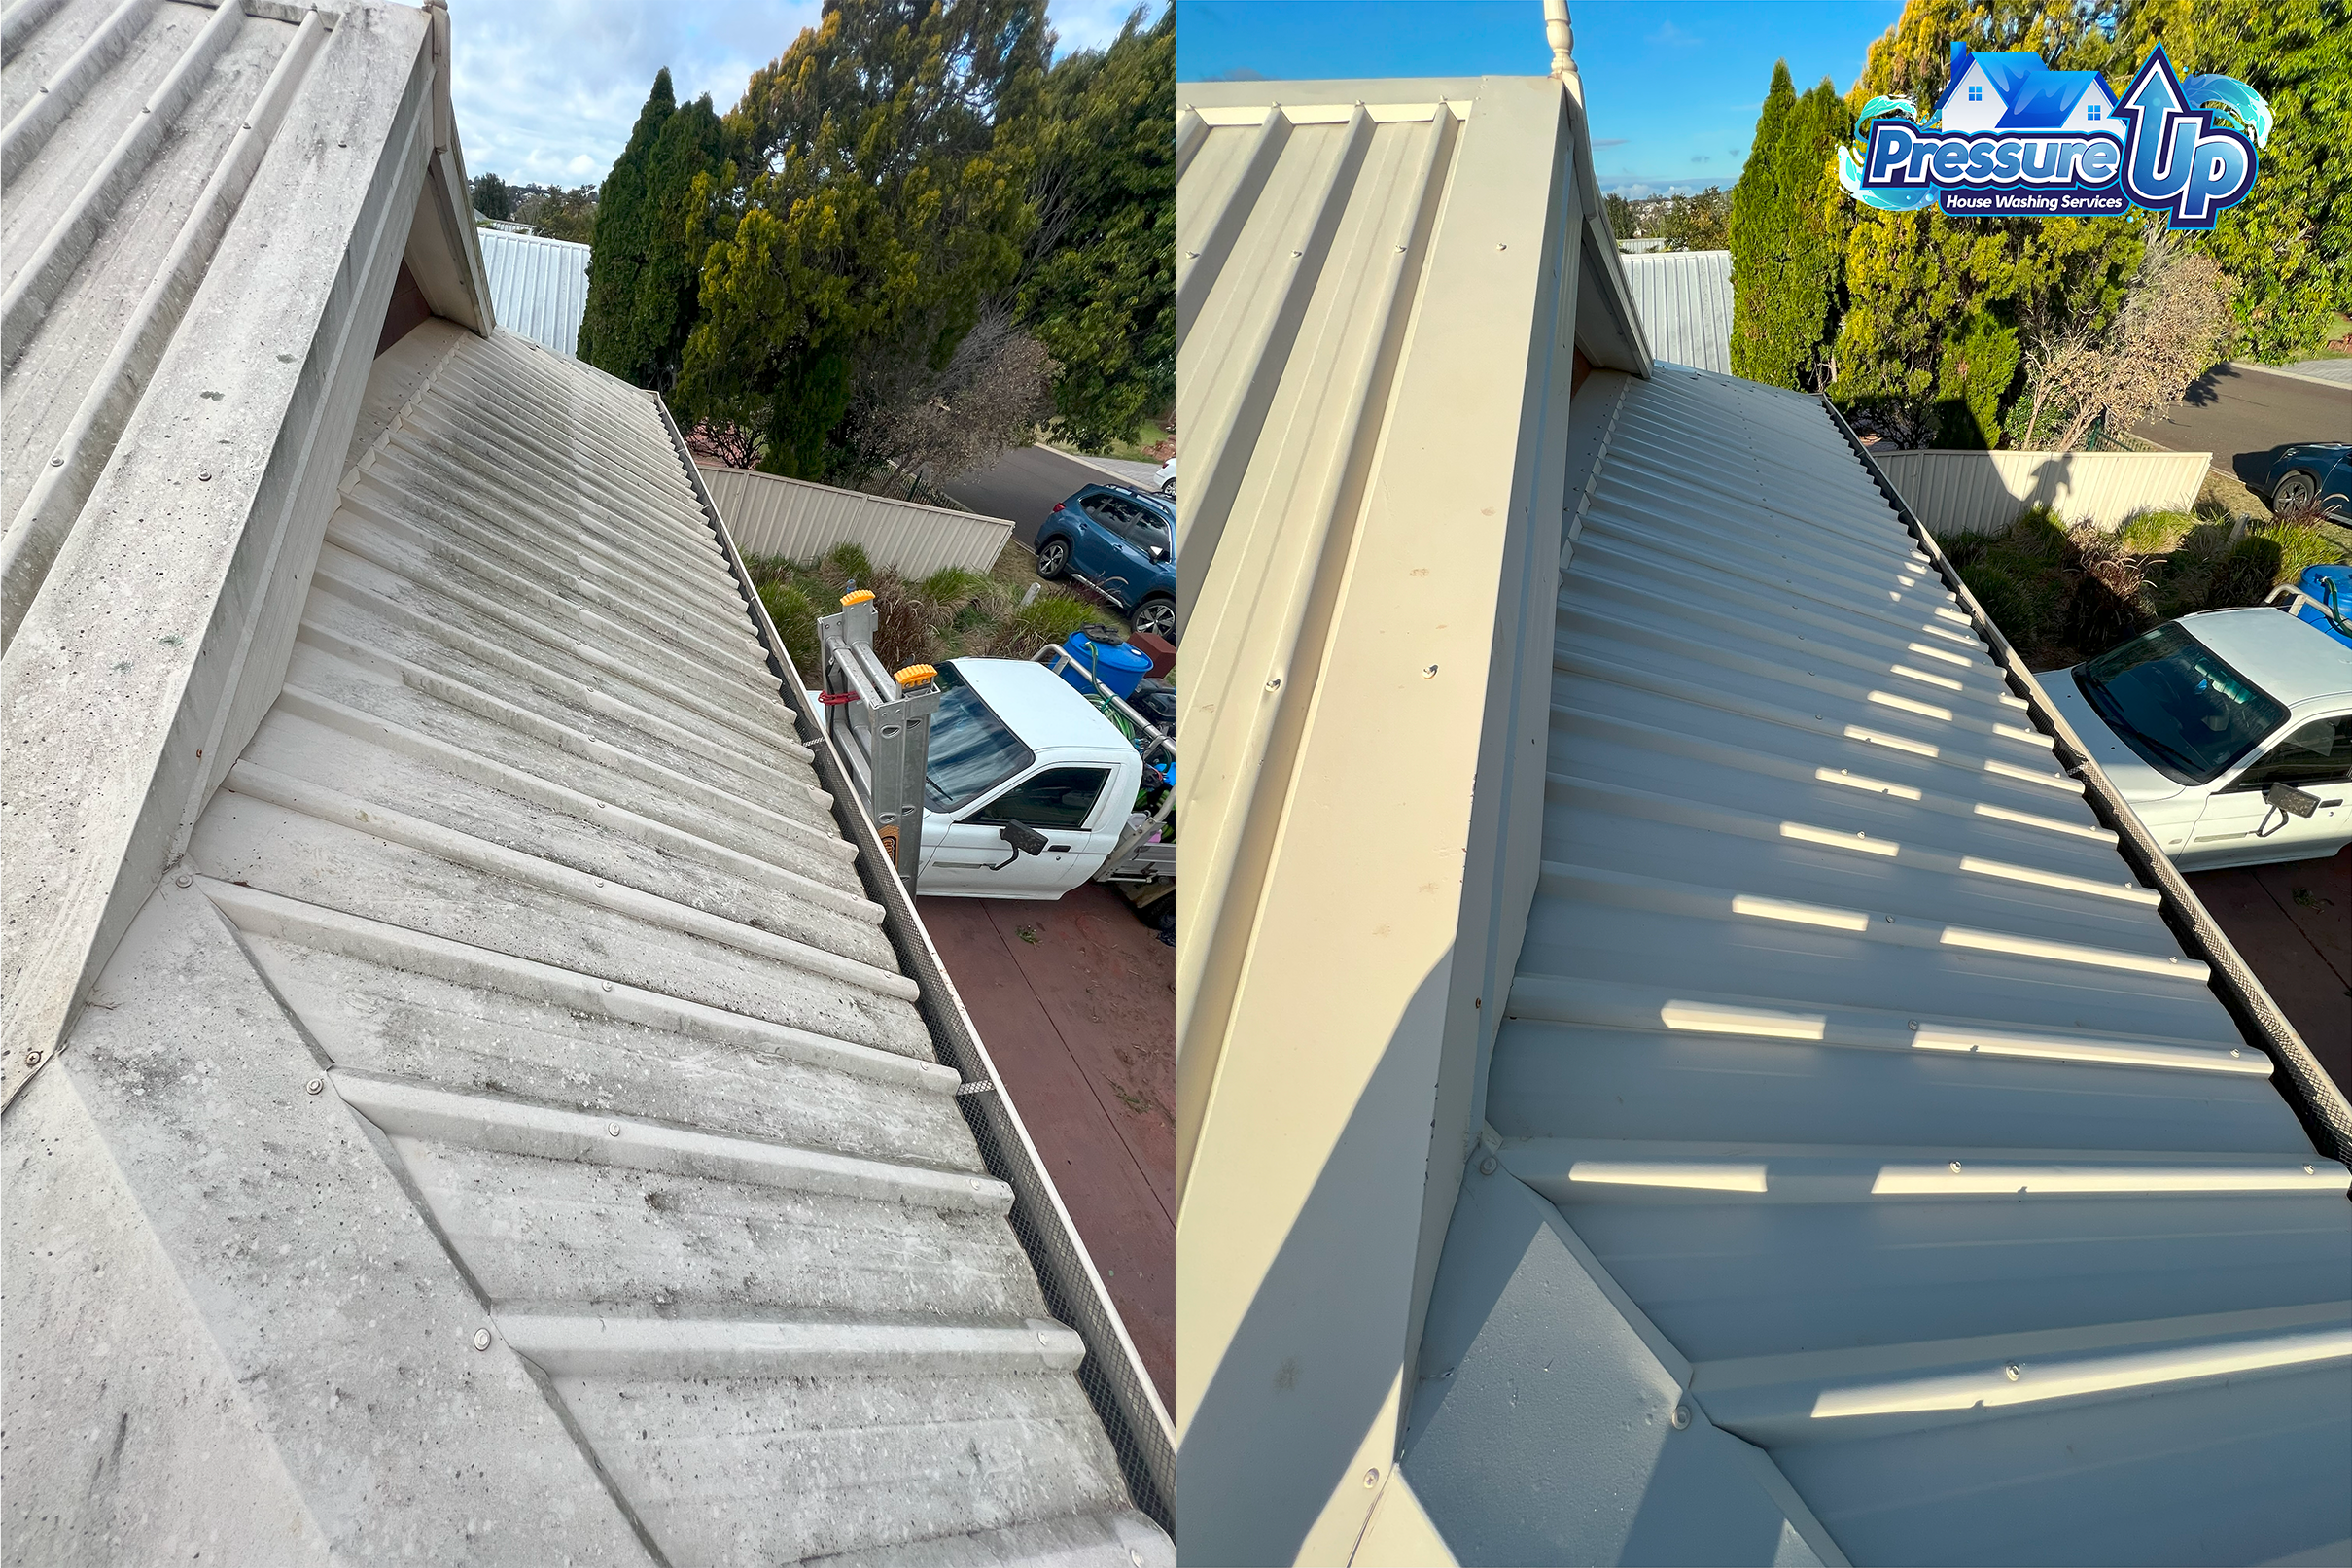 Mould Removal on Colorbond Roof in Kearney Springs, Toowoomba